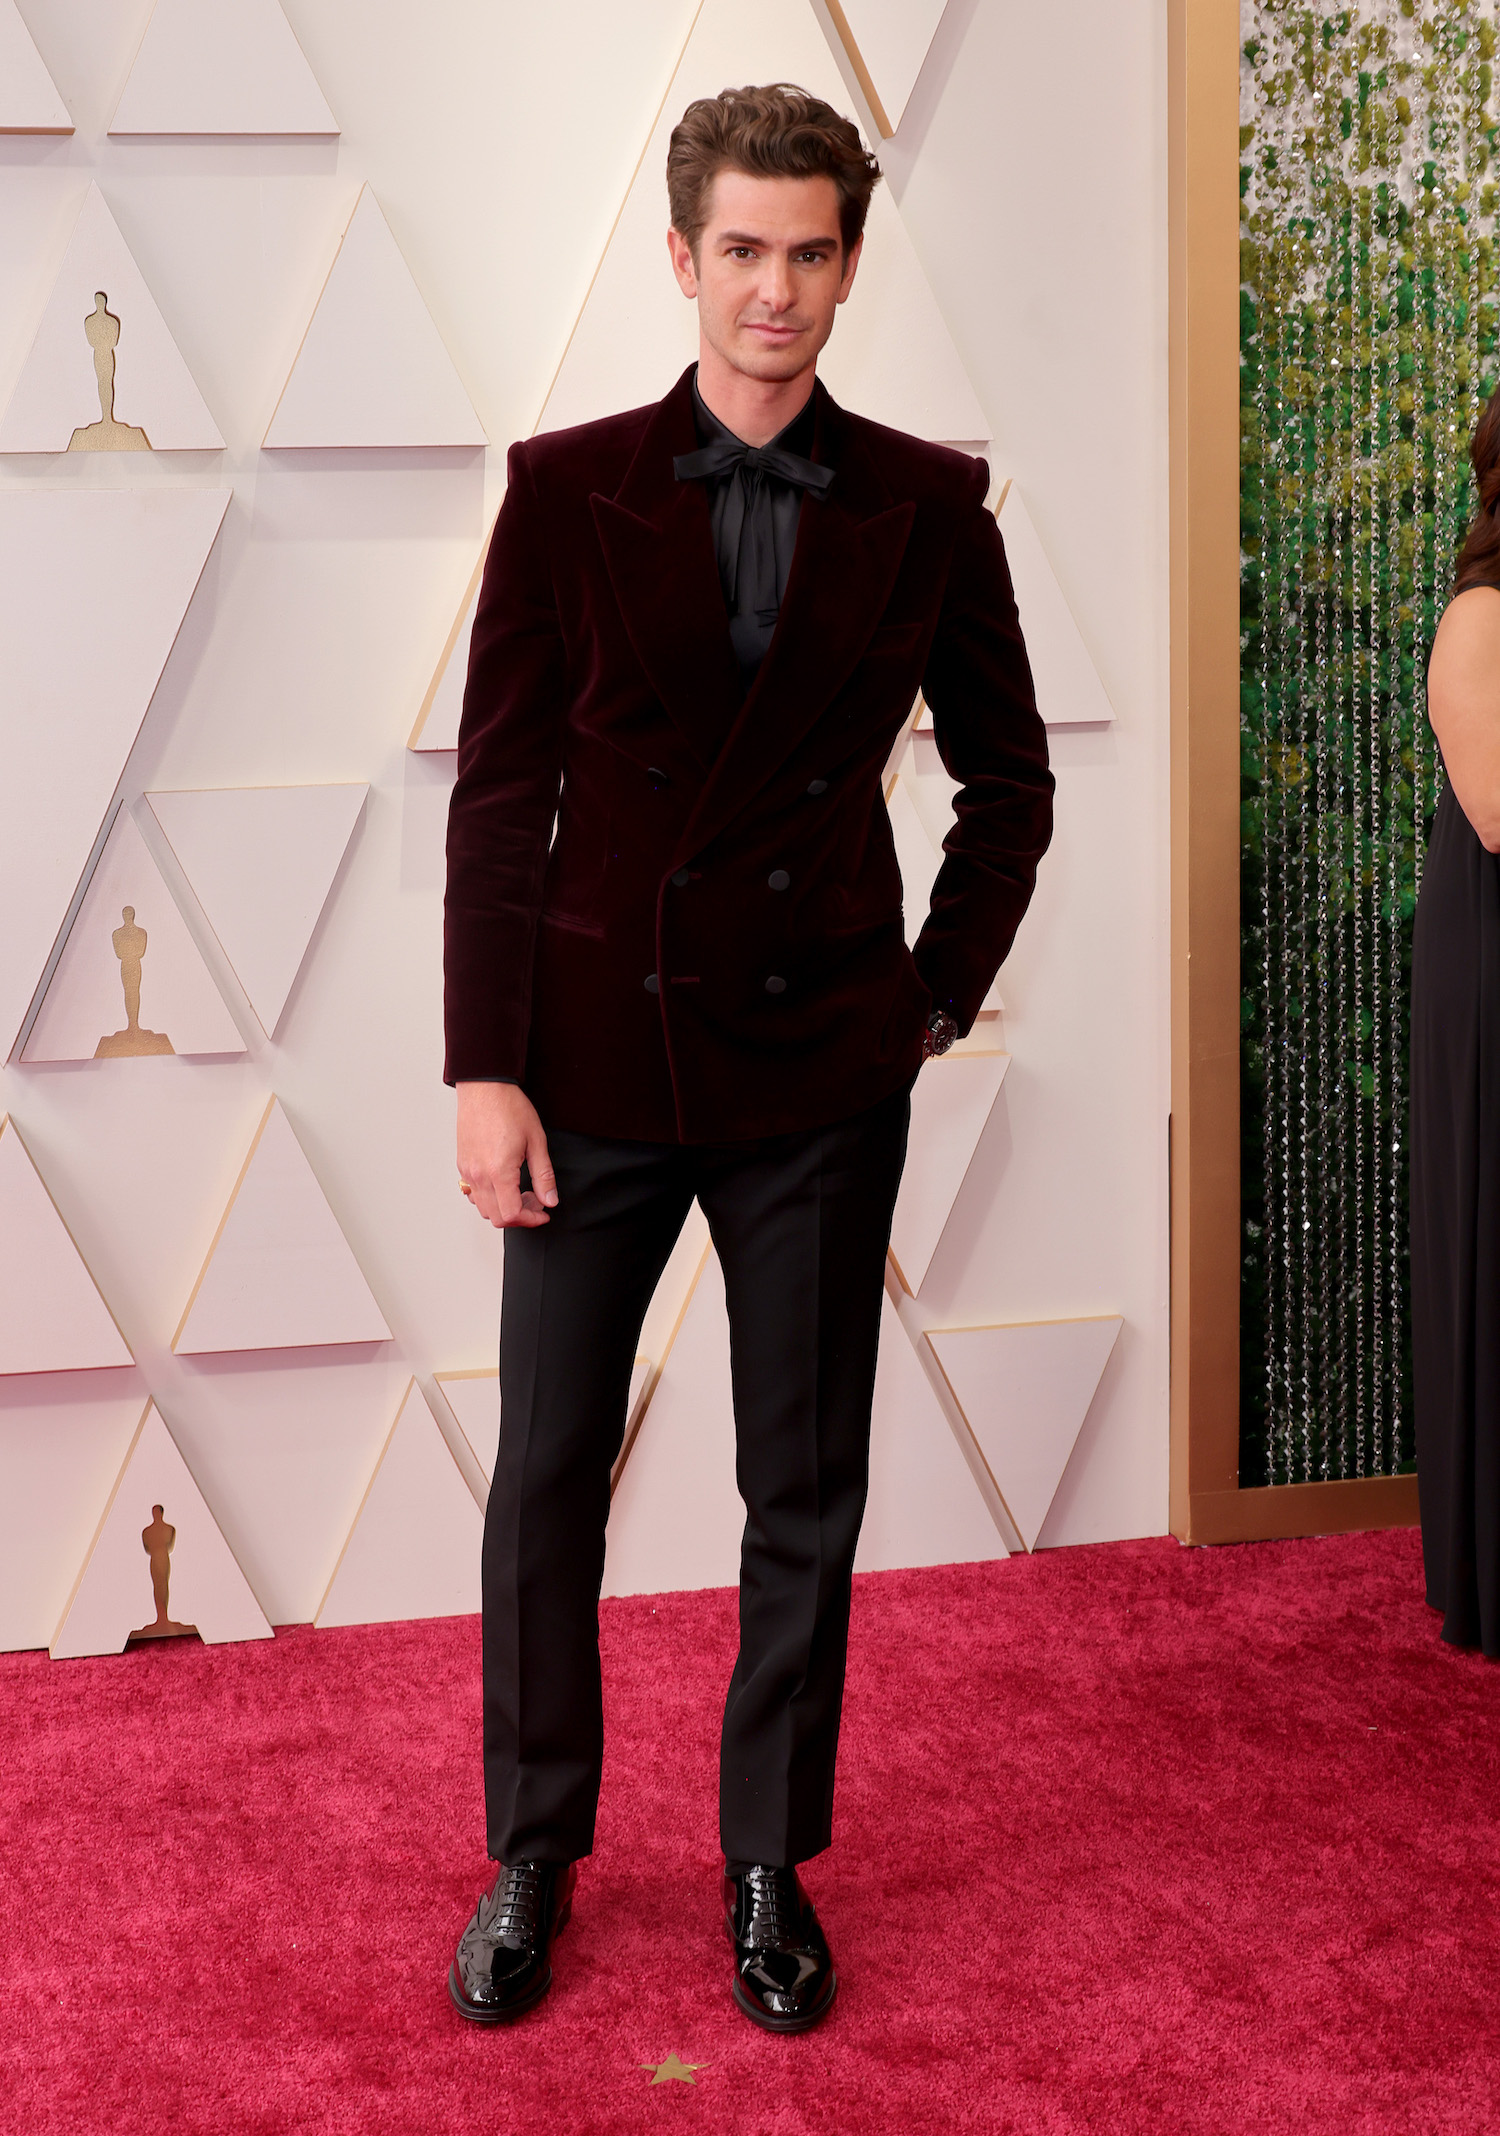 Andrew Garfield at the Oscars 2022